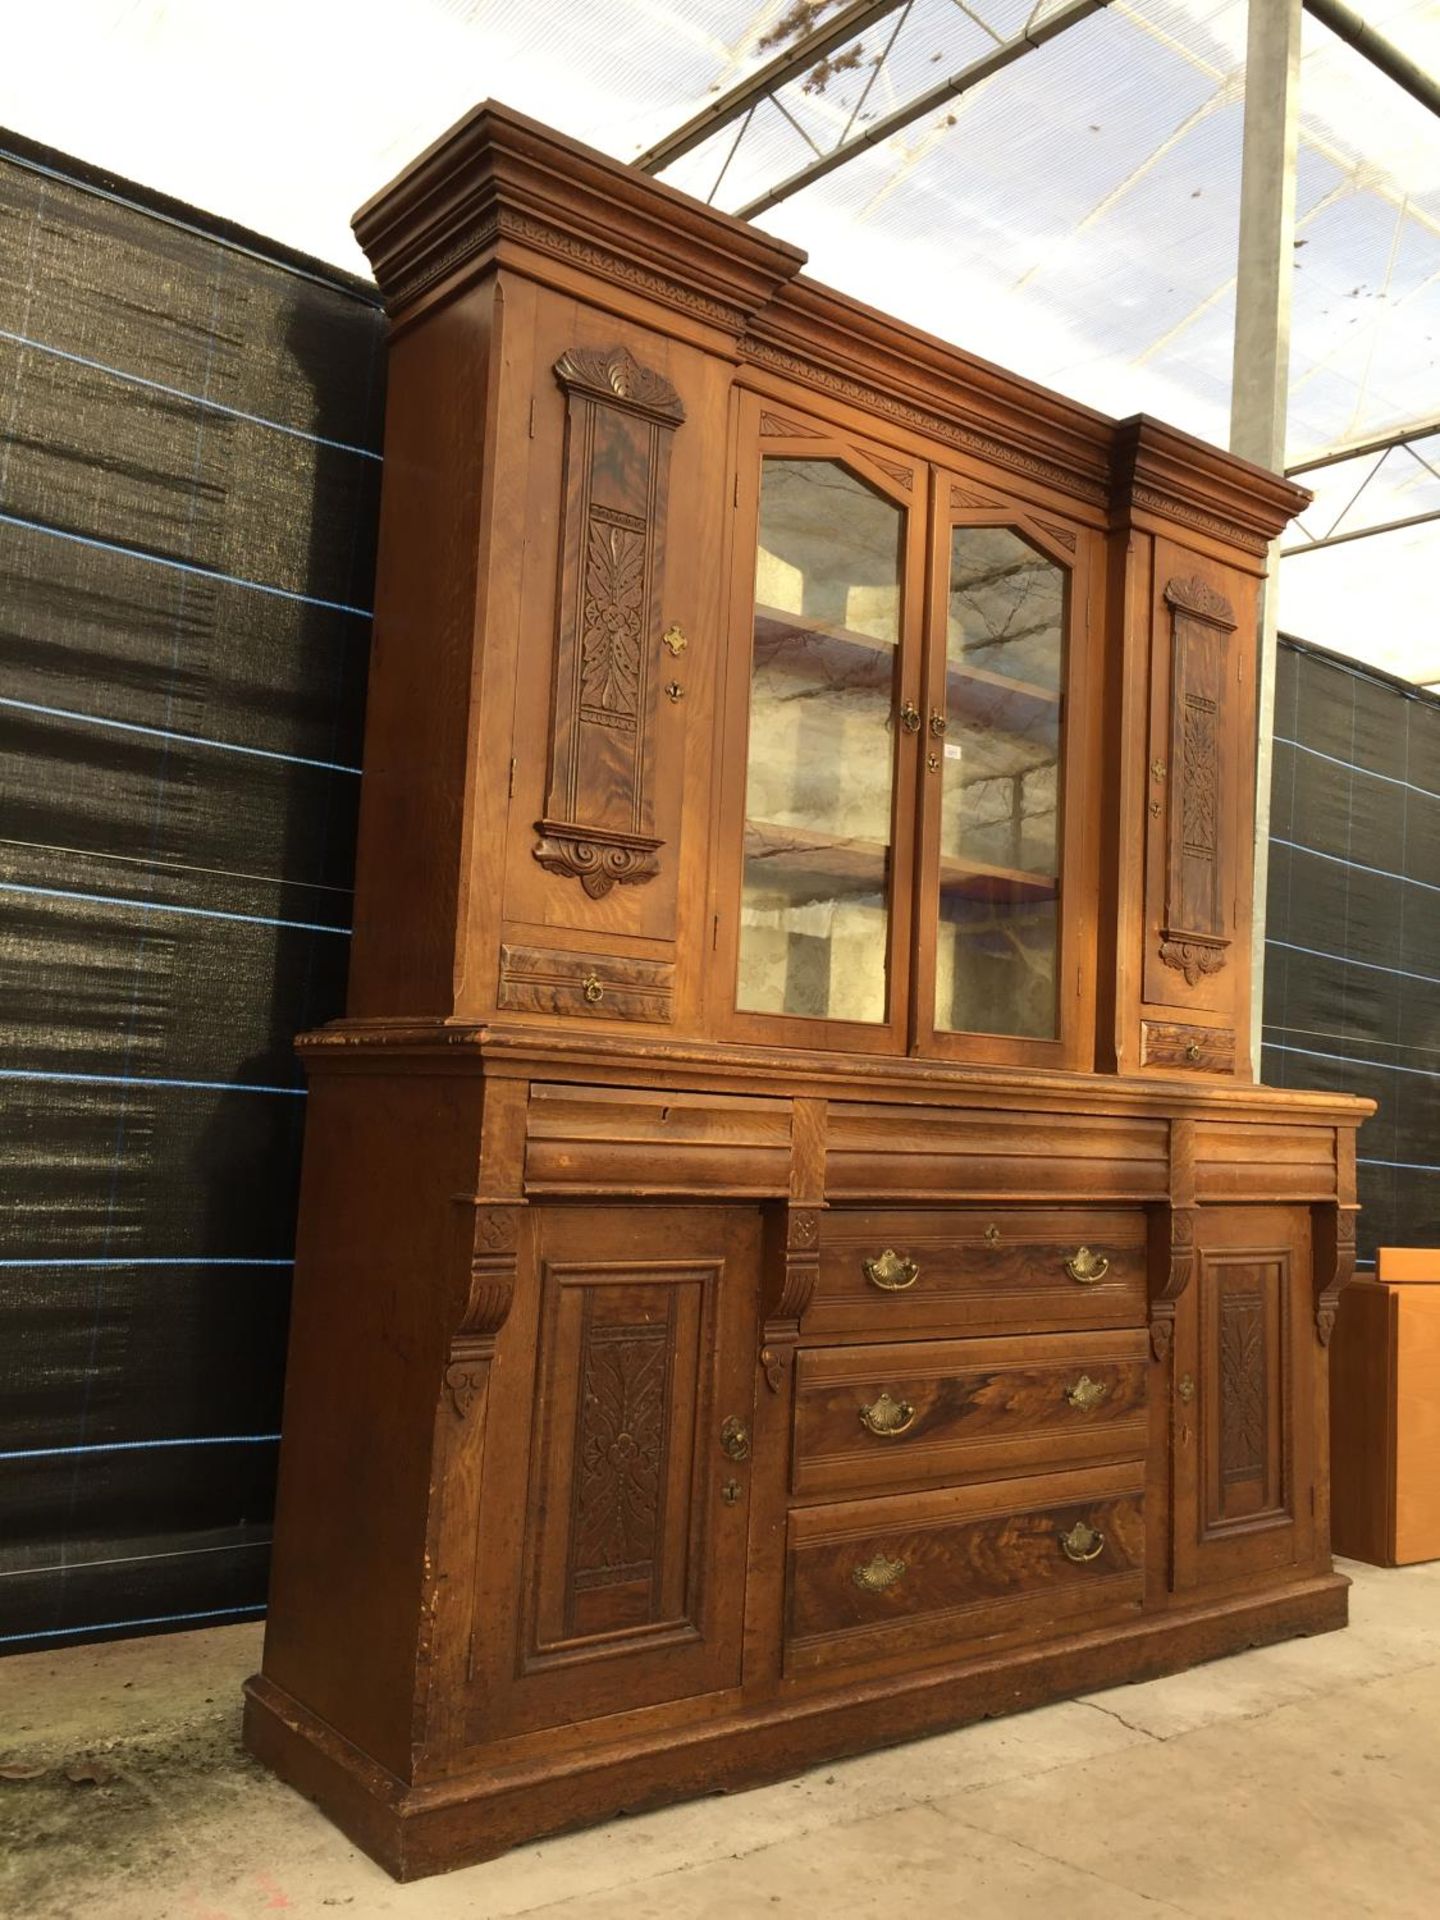 A VICTORIAN SCUMBLED PINE DRESSER, 74" WIDE, WITH INVERTED BREAKFRONT UPPER PORTION, HAVING PANELLED - Image 2 of 10